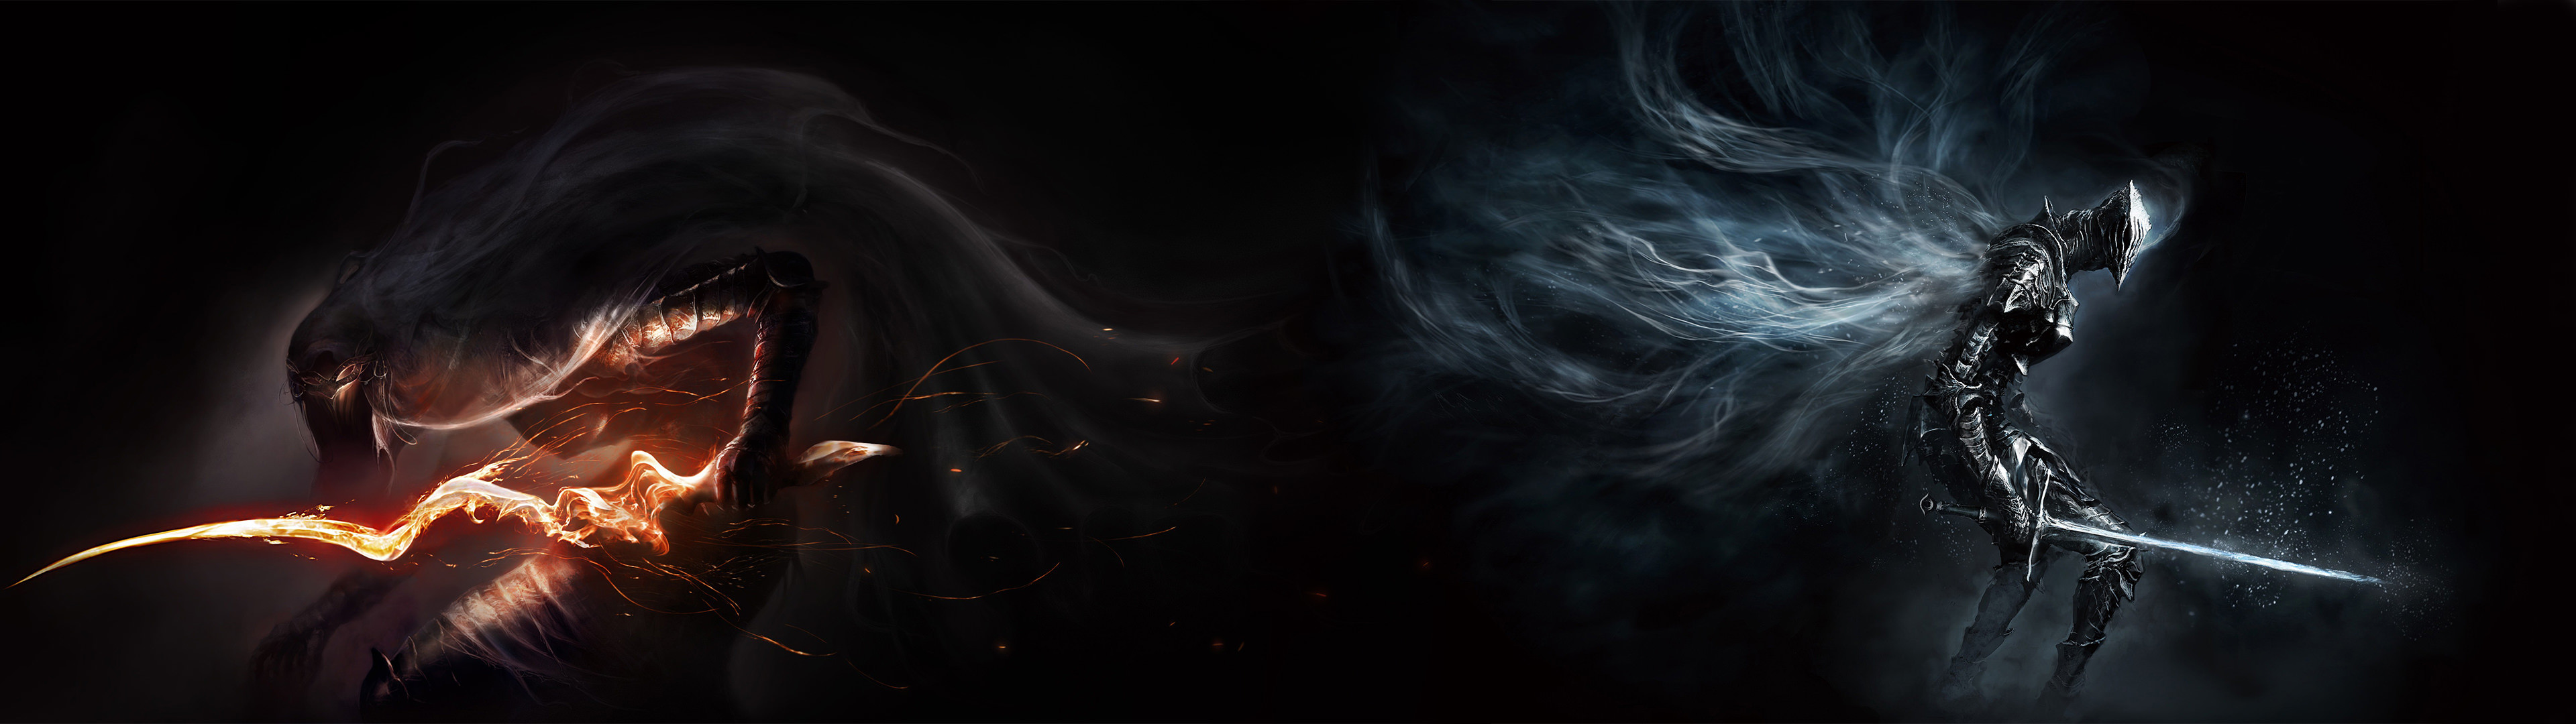 3840x1080 [] Dark souls 3 : The Dancer of the Boreal Valley and Boreal  Outrider ...